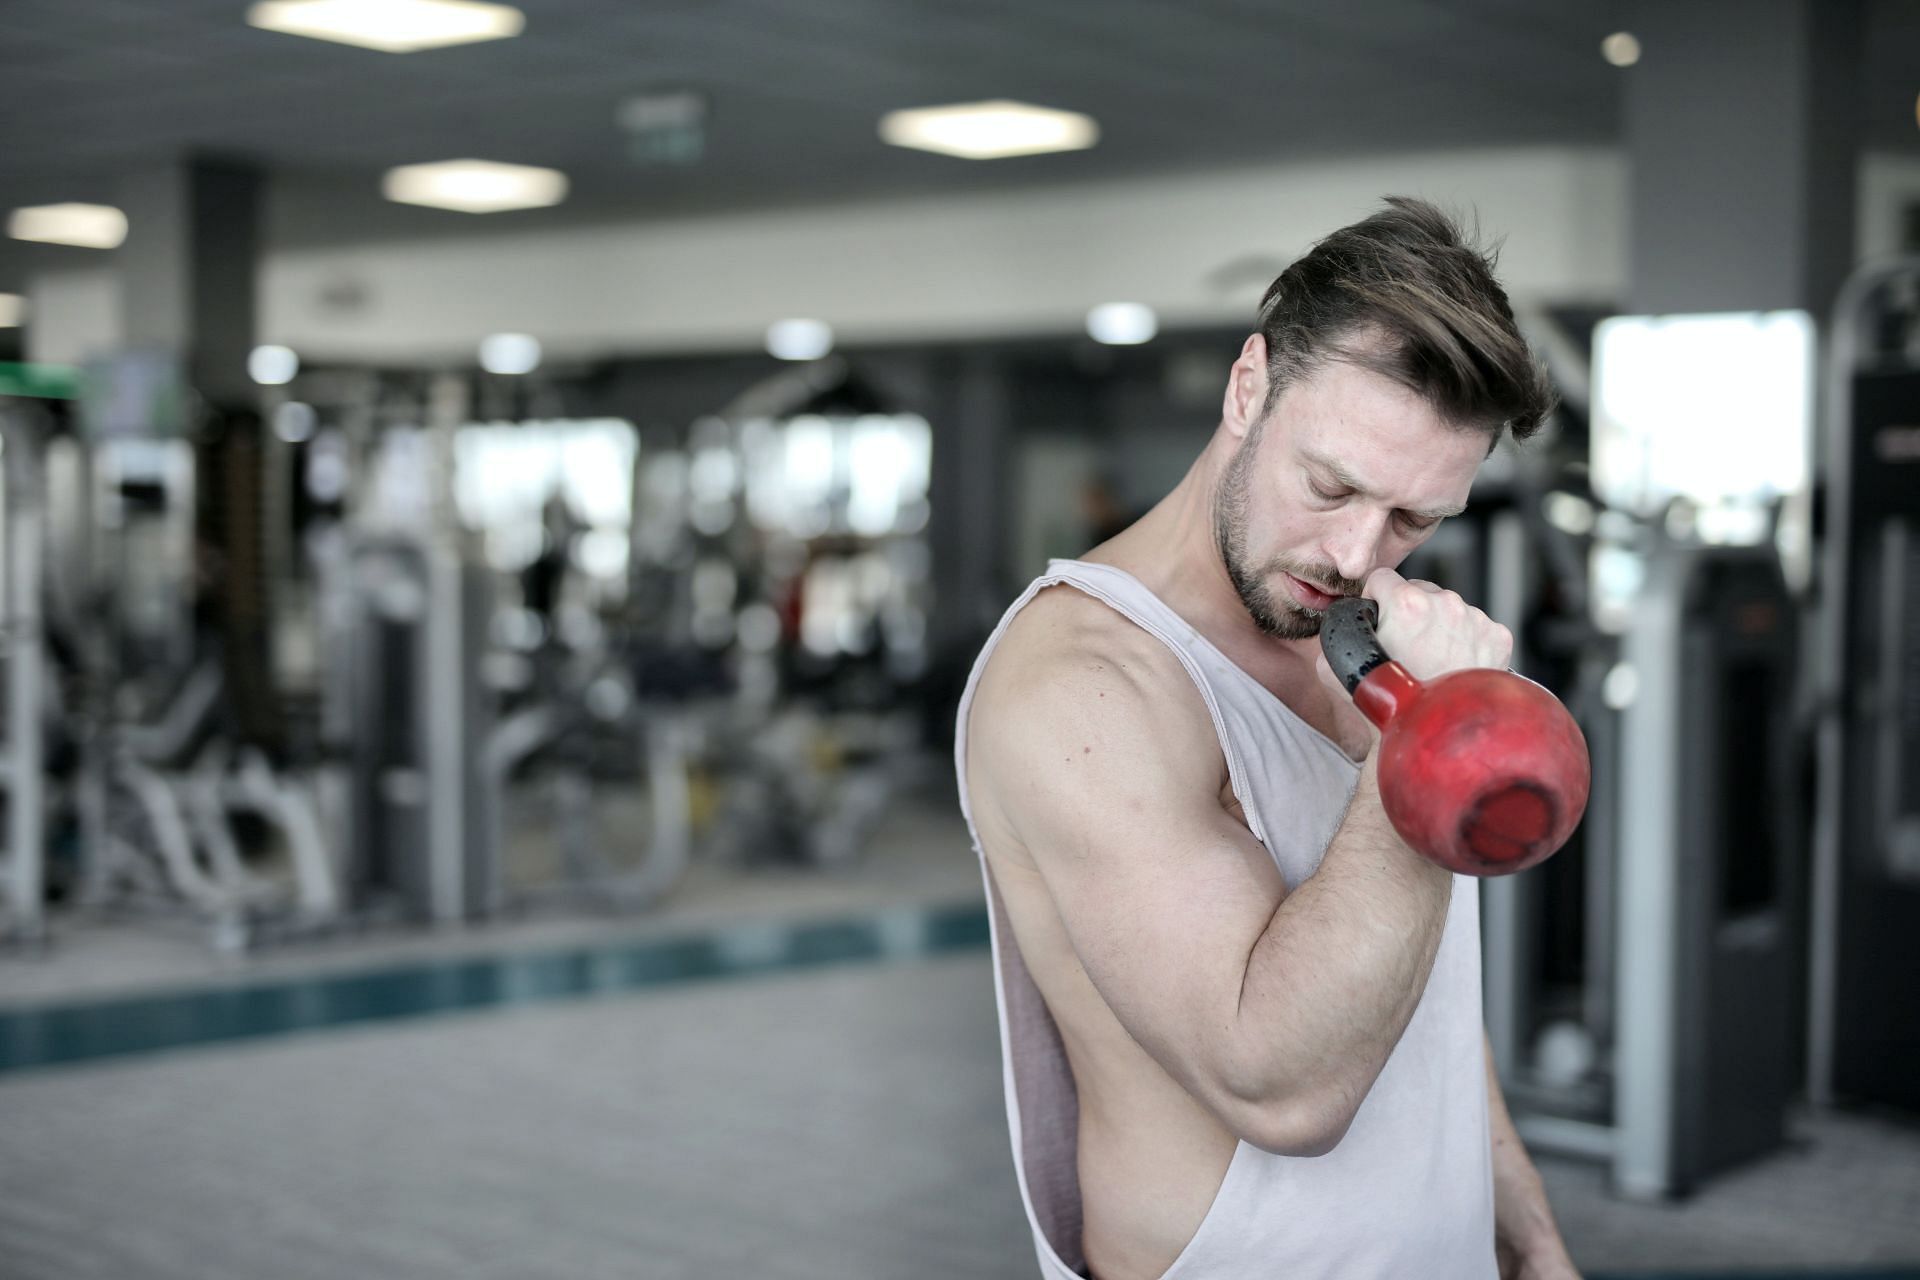 Kettlebell swings are a high-intensity weighted exercise. (Image via Pexels/Andrea Piacquadio)